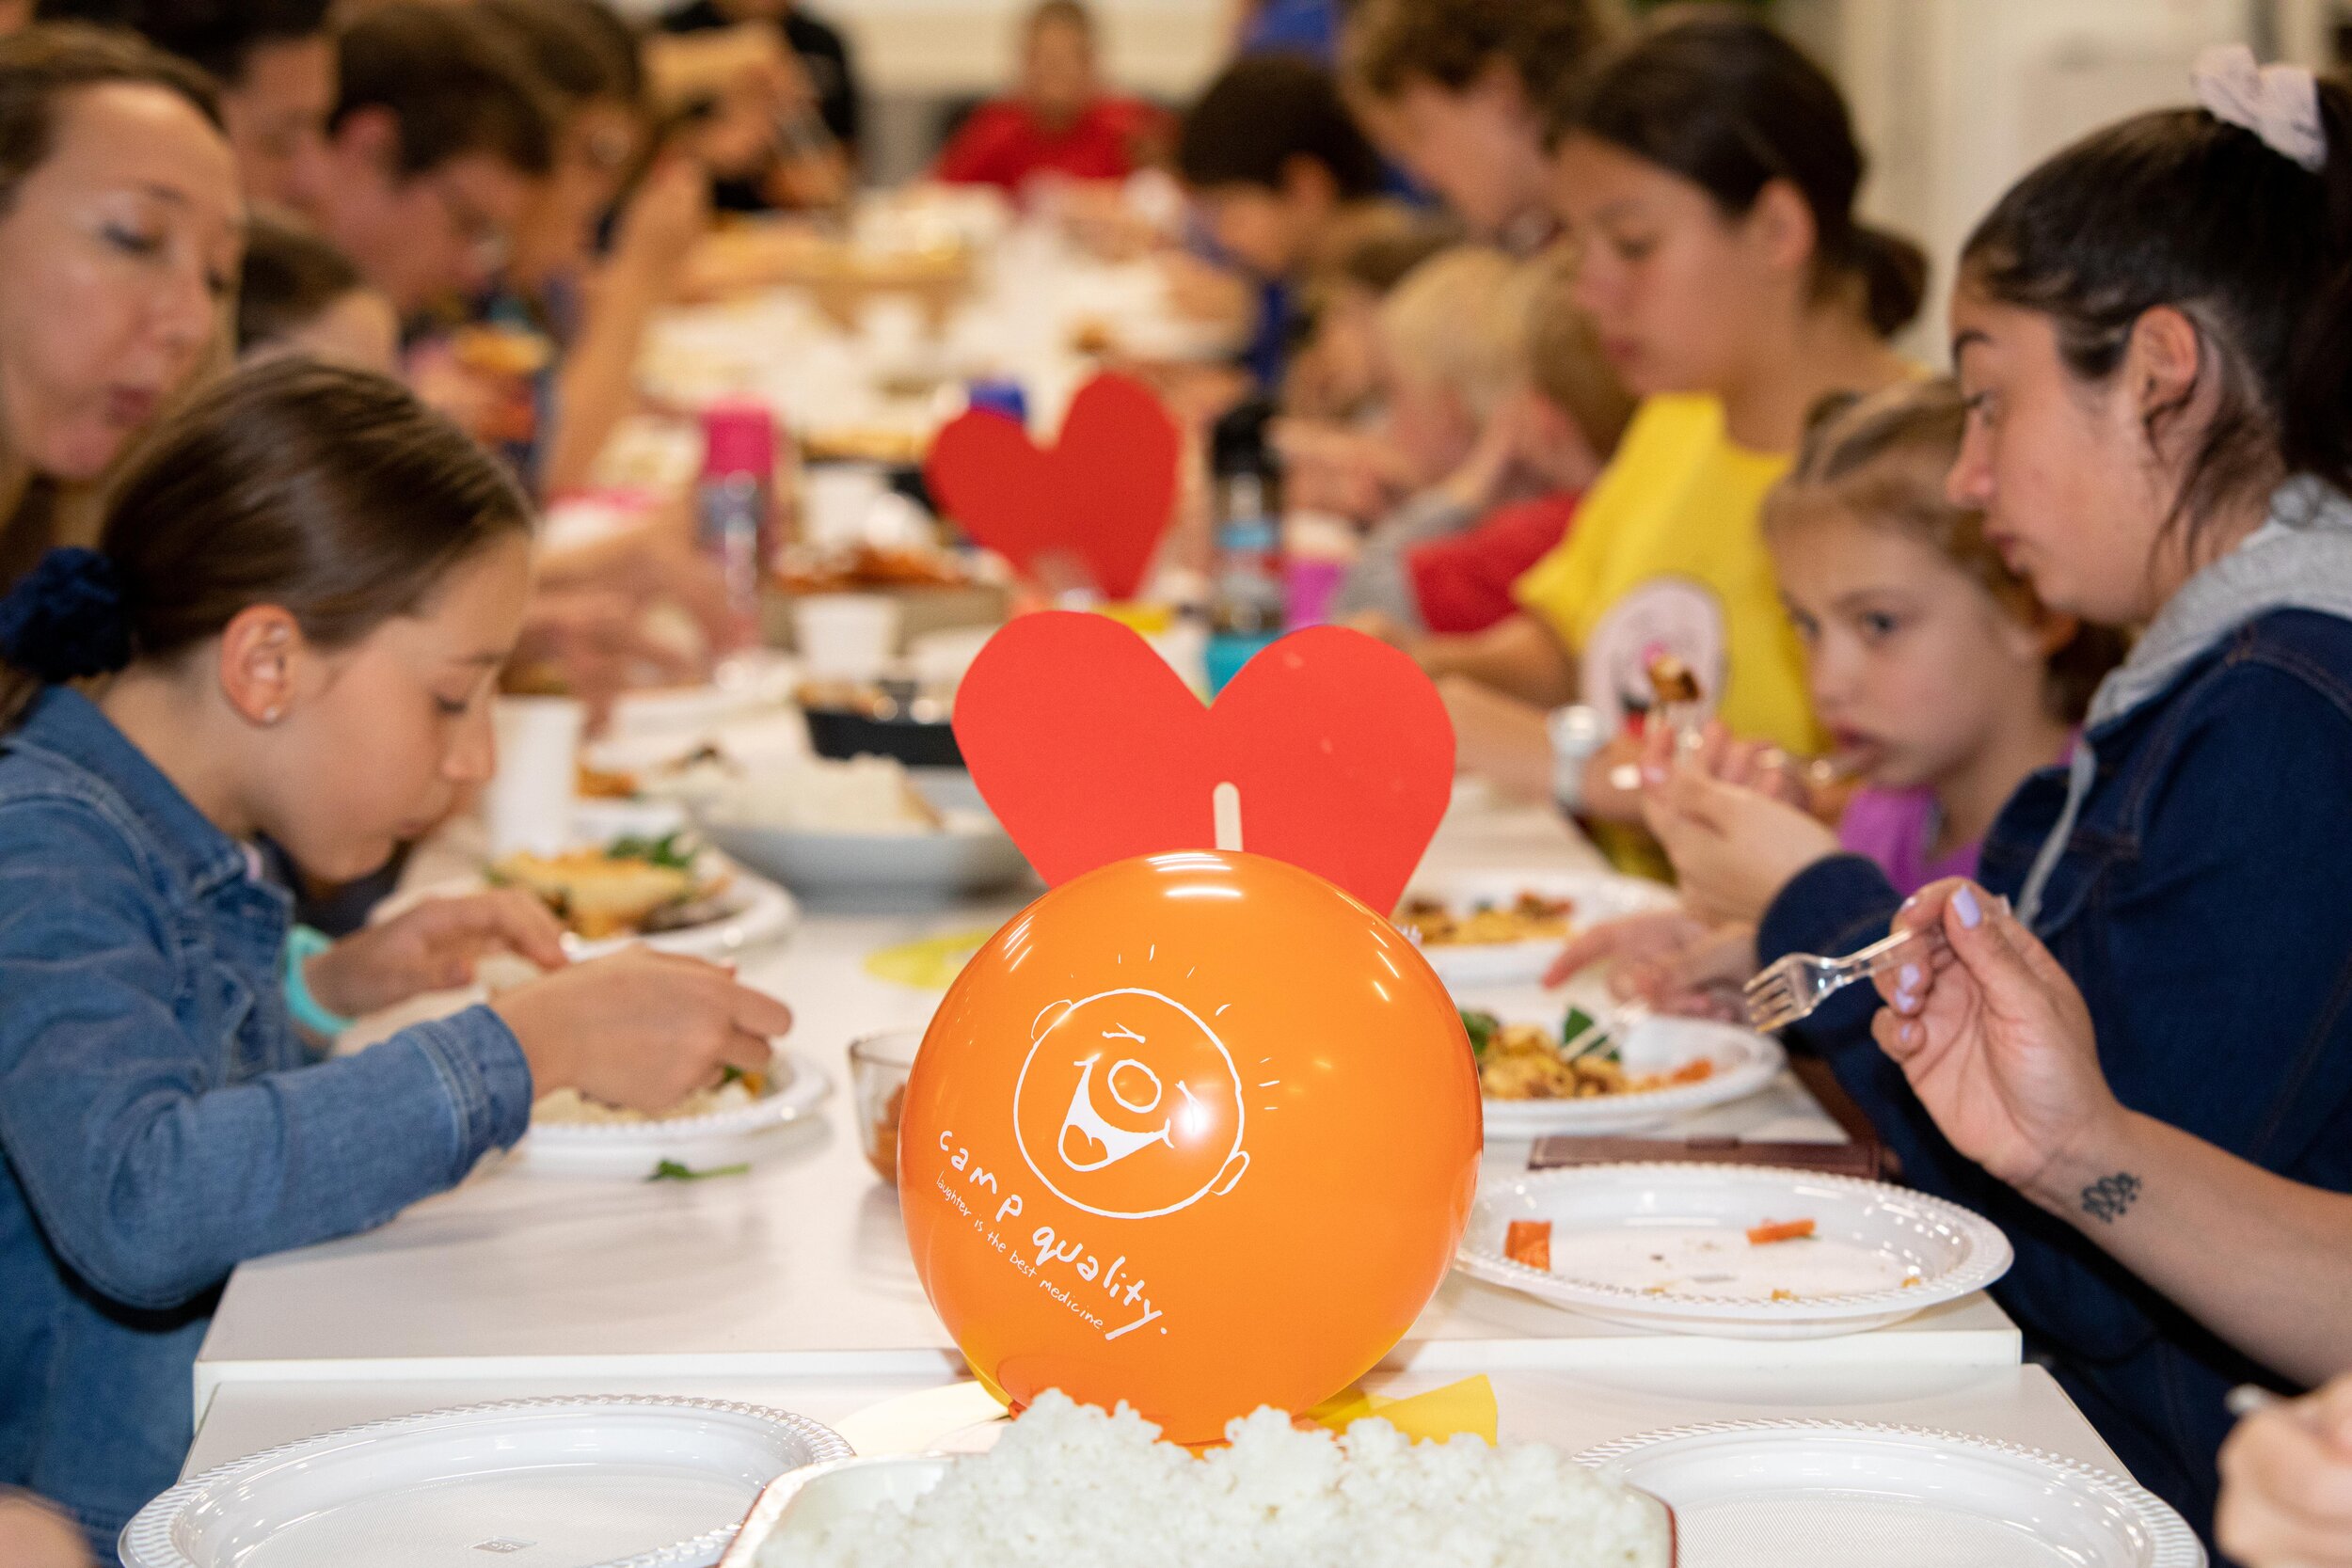 children eating at a table with party decorations